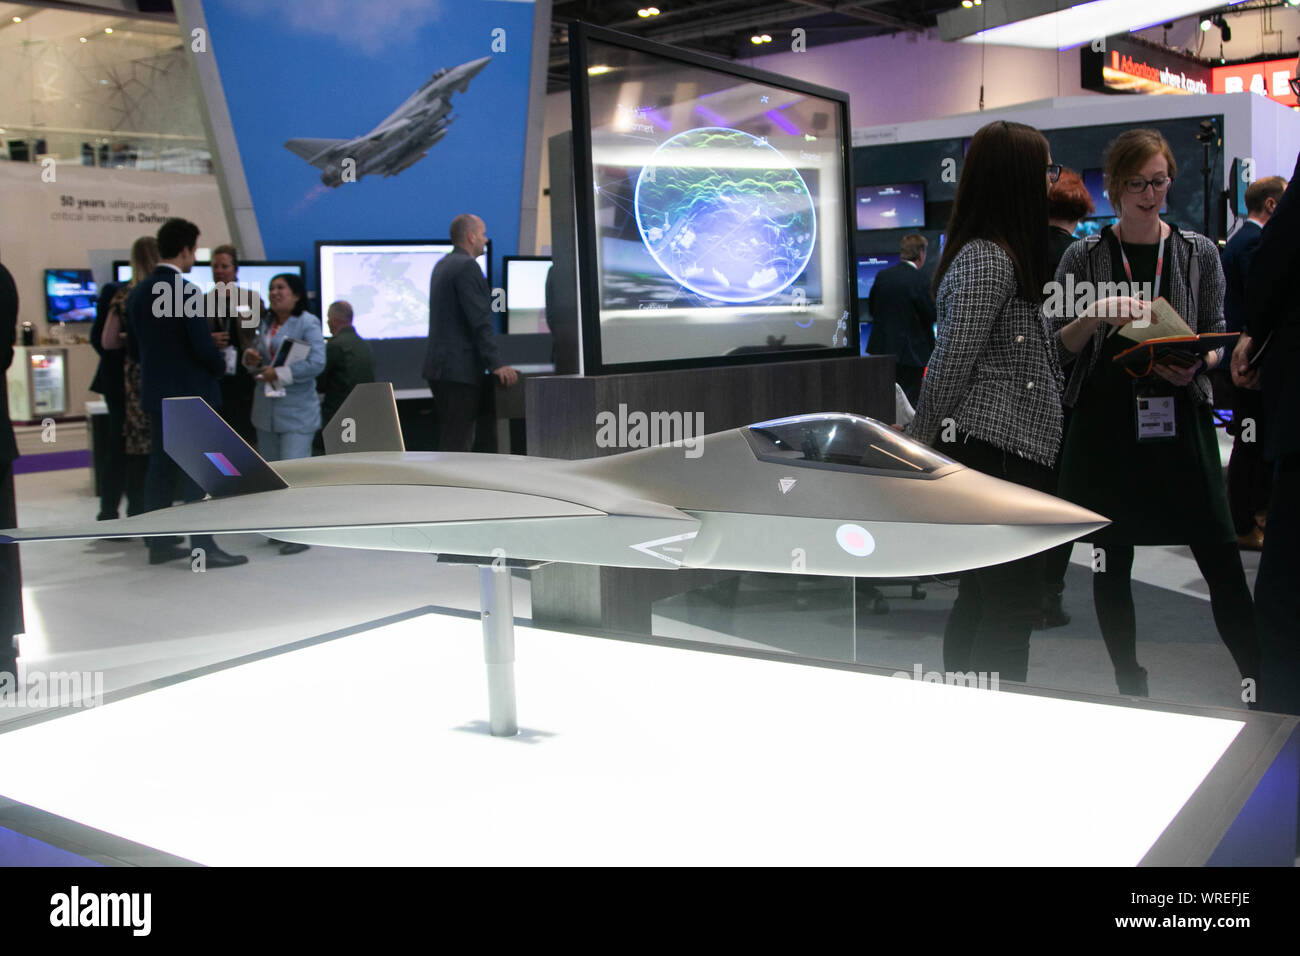 London, UK. 10th September 2019. Tempest Concept aircraft model at the DSEI,  the world's leading defence and security event which opens at the Excel centre in London Docklands from 10-13 September bringing together hundreds of international arms and defence exhibitors Credit: amer ghazzal/Alamy Live News Stock Photo